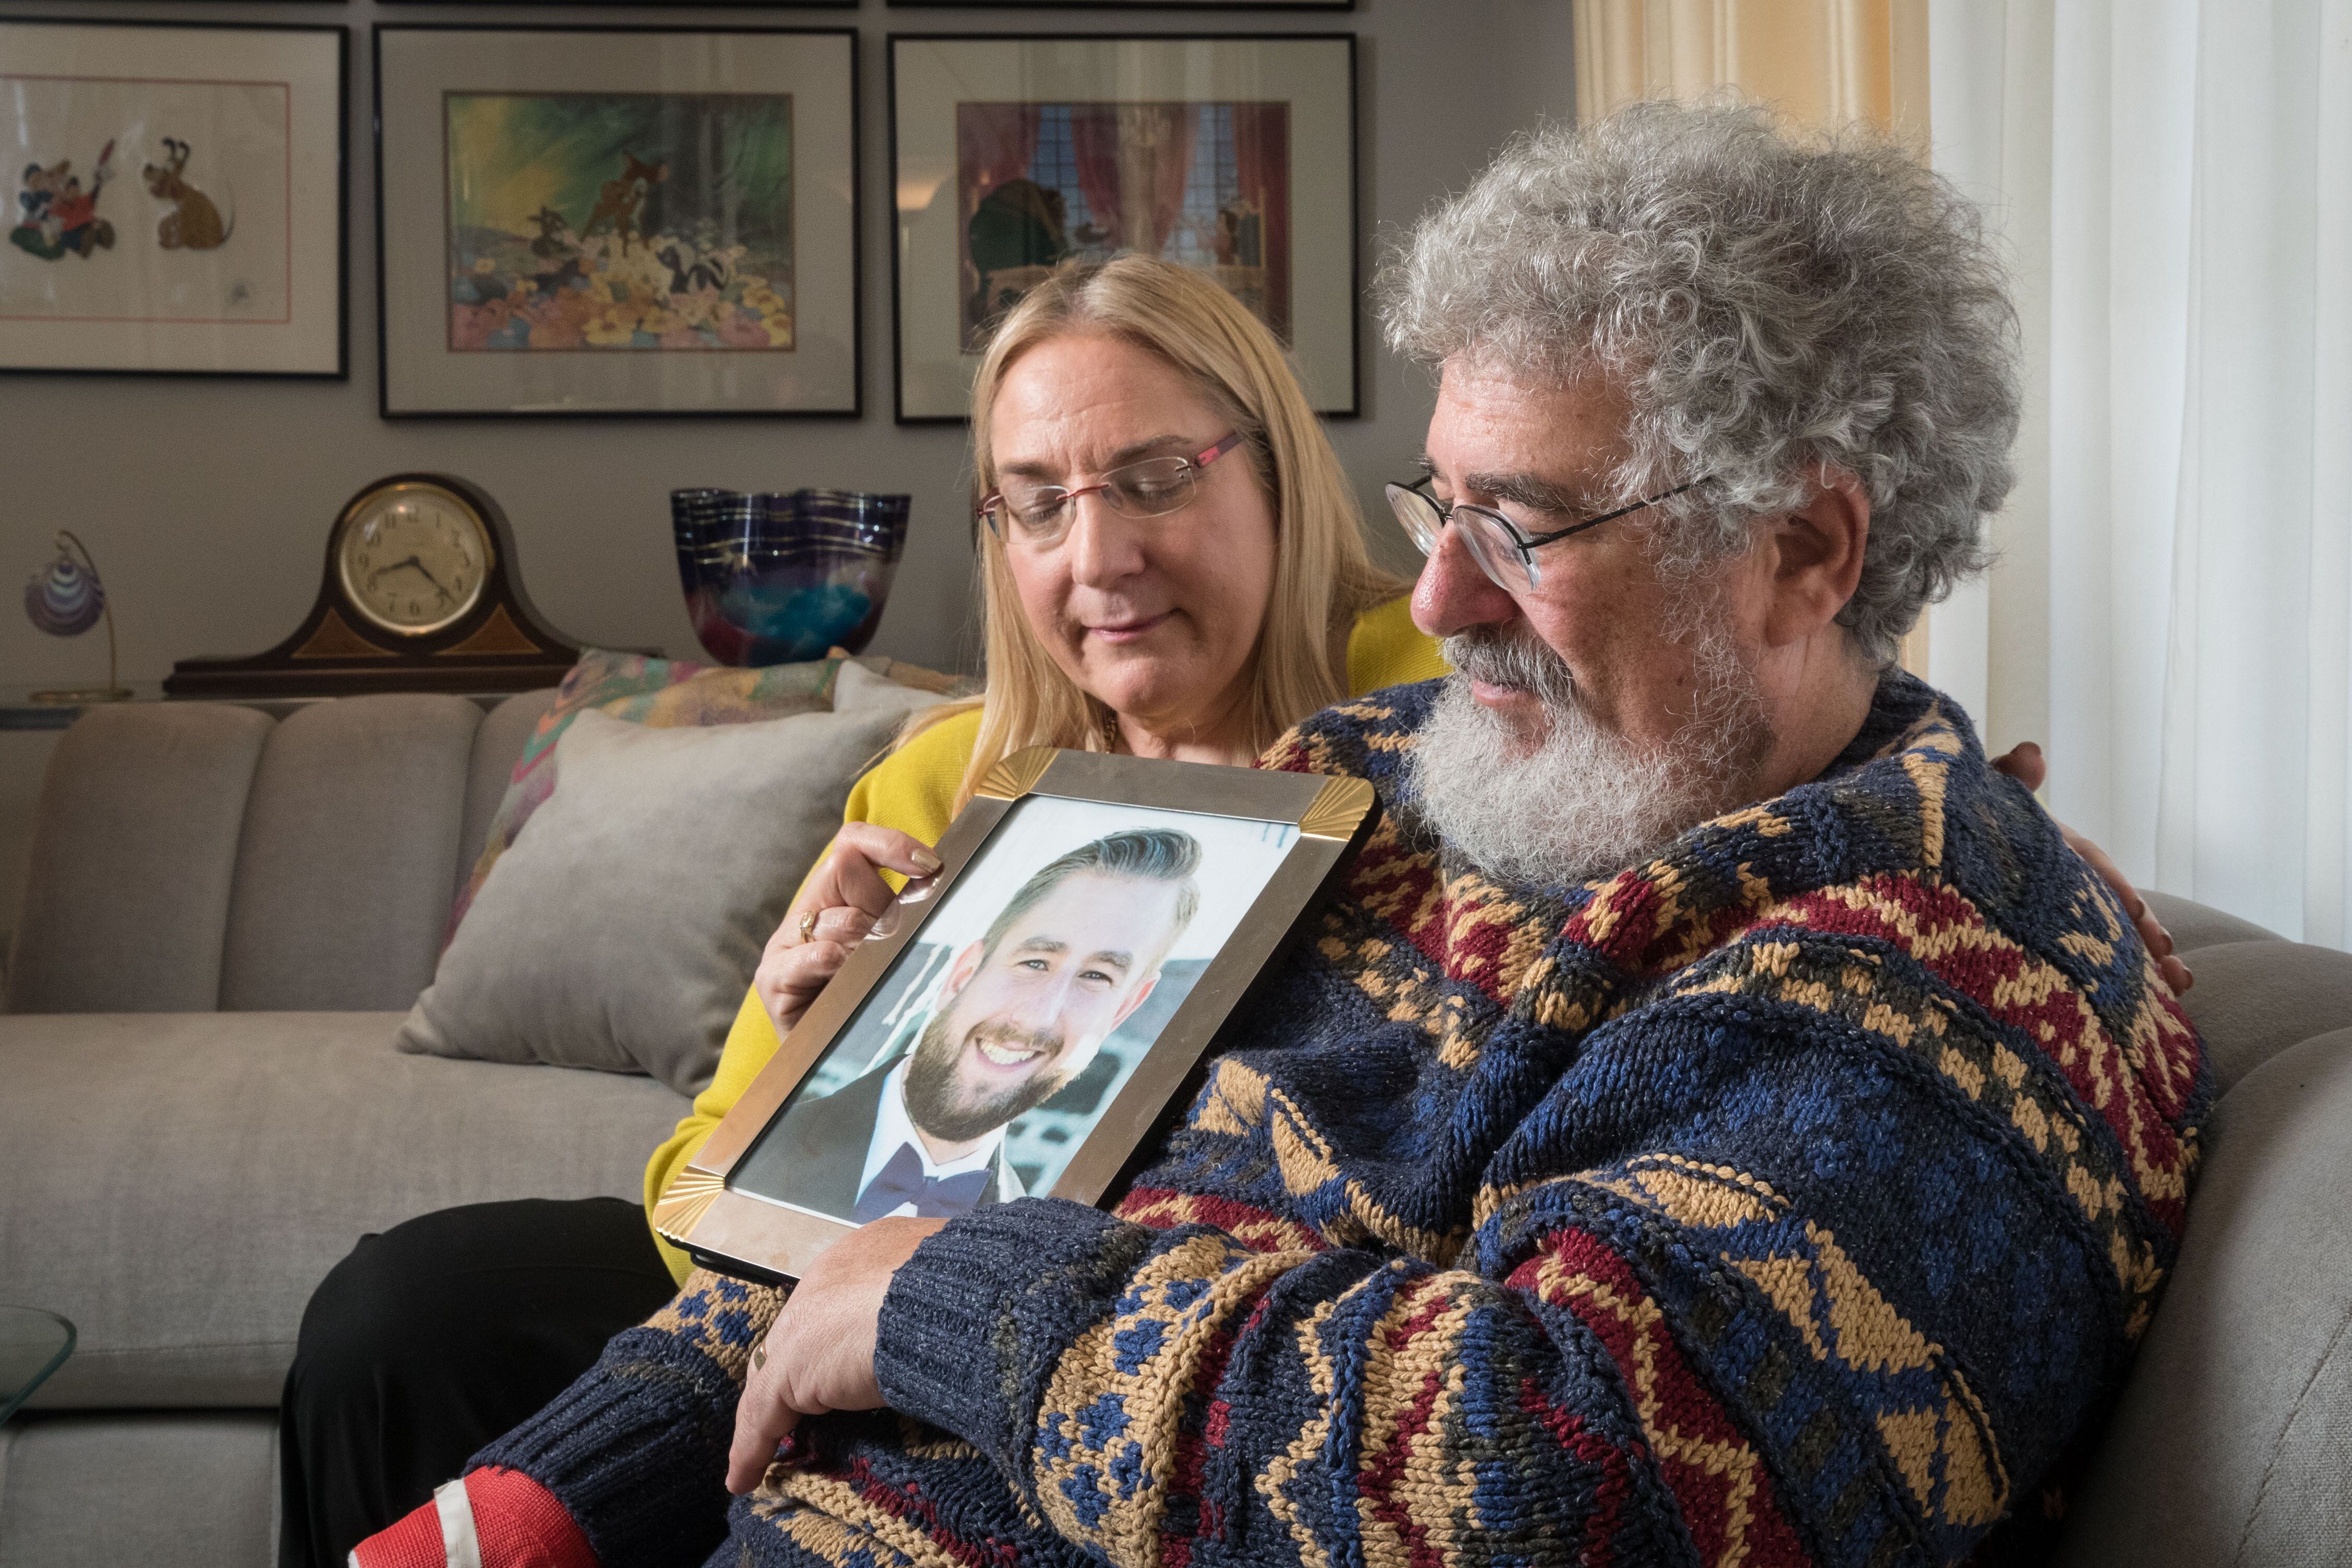 Mary Rich and her husband, Joel Rich hold a photo of their son in their home in Omaha, Nebraska, on Jan. 11, 2017.